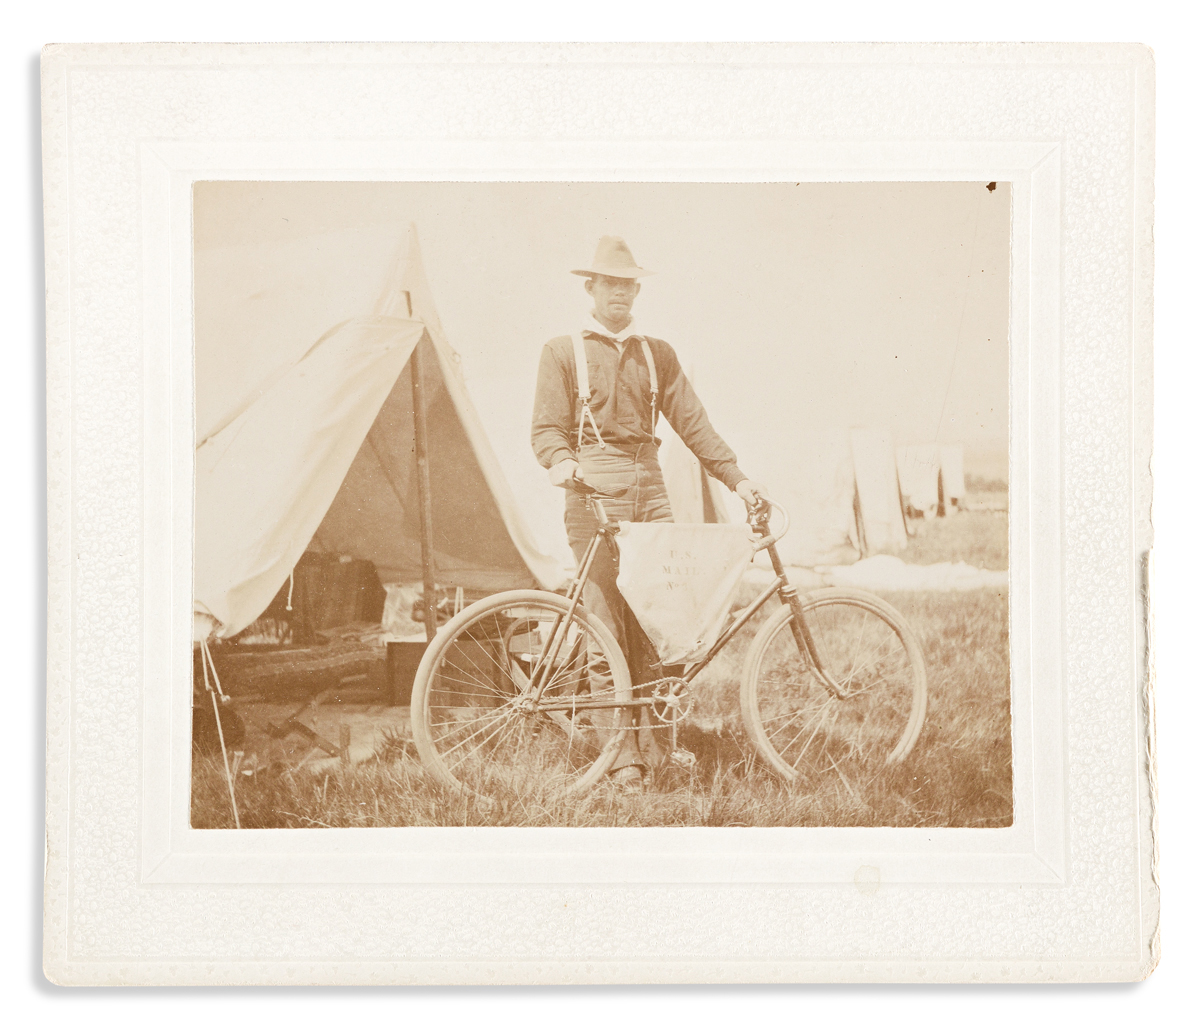 (WEST--WYOMING.) Henry C. Langdon; photographer. Photographs of soldiers and encampments at Fort D. A. Russell.